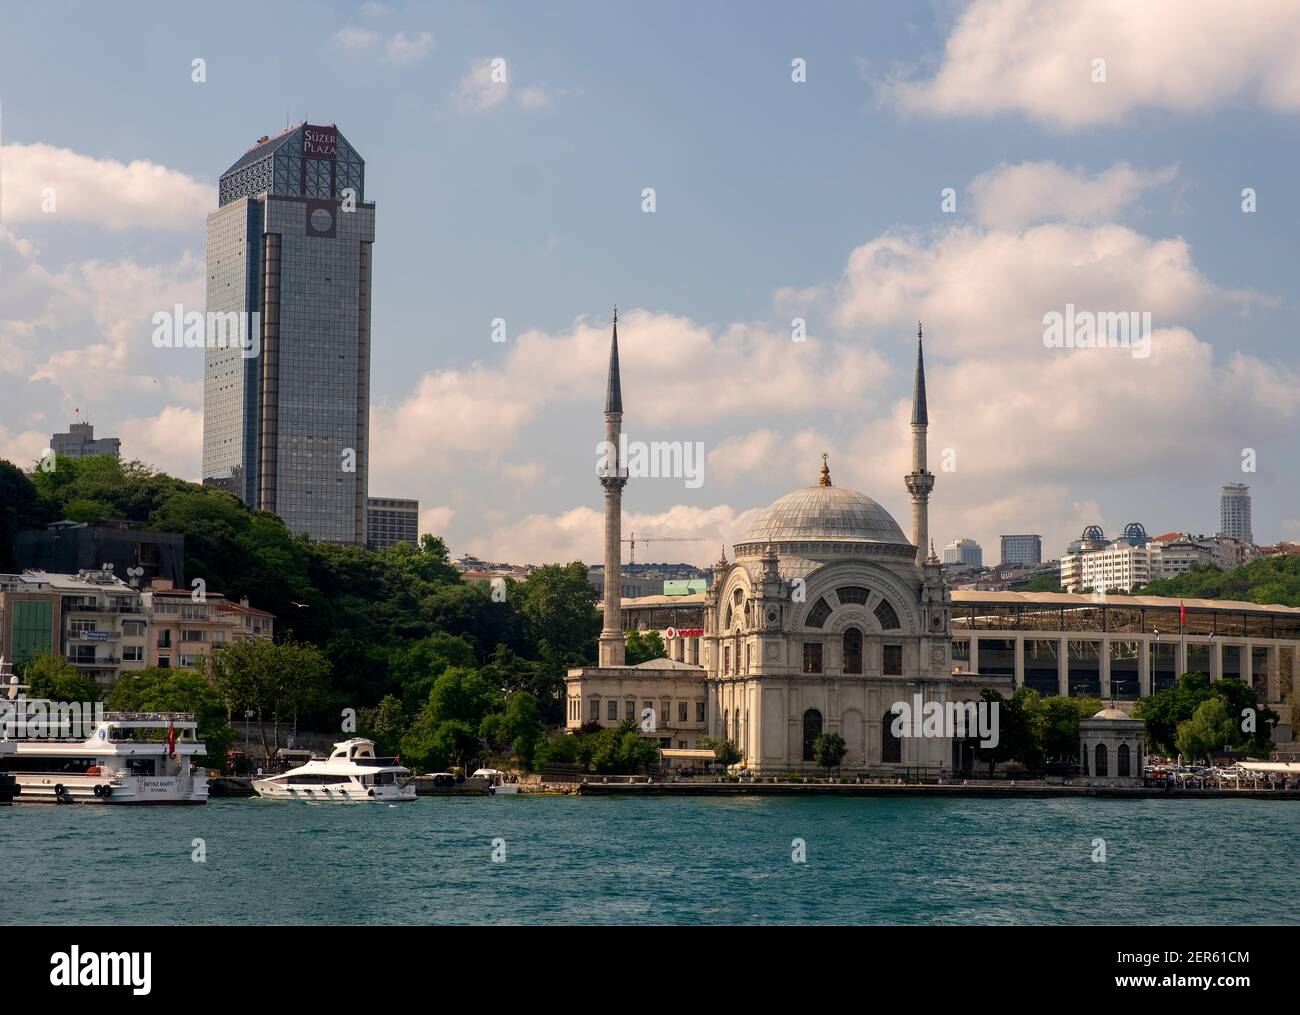 Istanbul, Turkey - June 14, 2019: Dolmabahce Mosque in Istanbul.The mosque located near the Bosporus among the new and modern buildings,Kabatas,Istanb Stock Photo